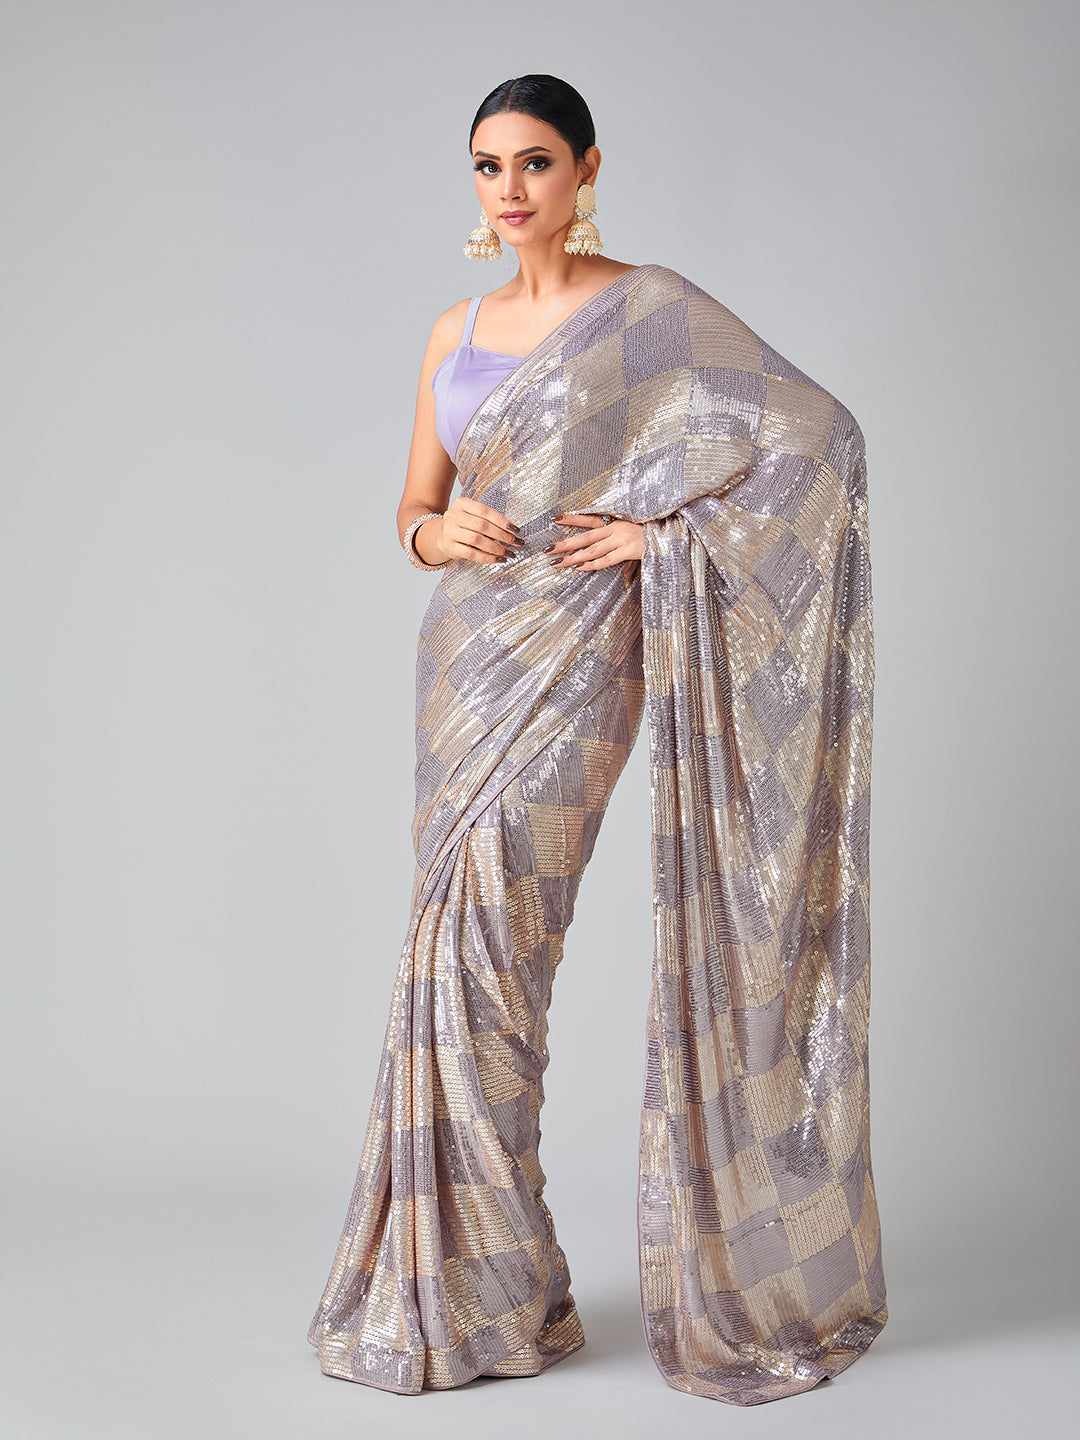 Beautifully Contrasted Gray & Gold Sequin Saree